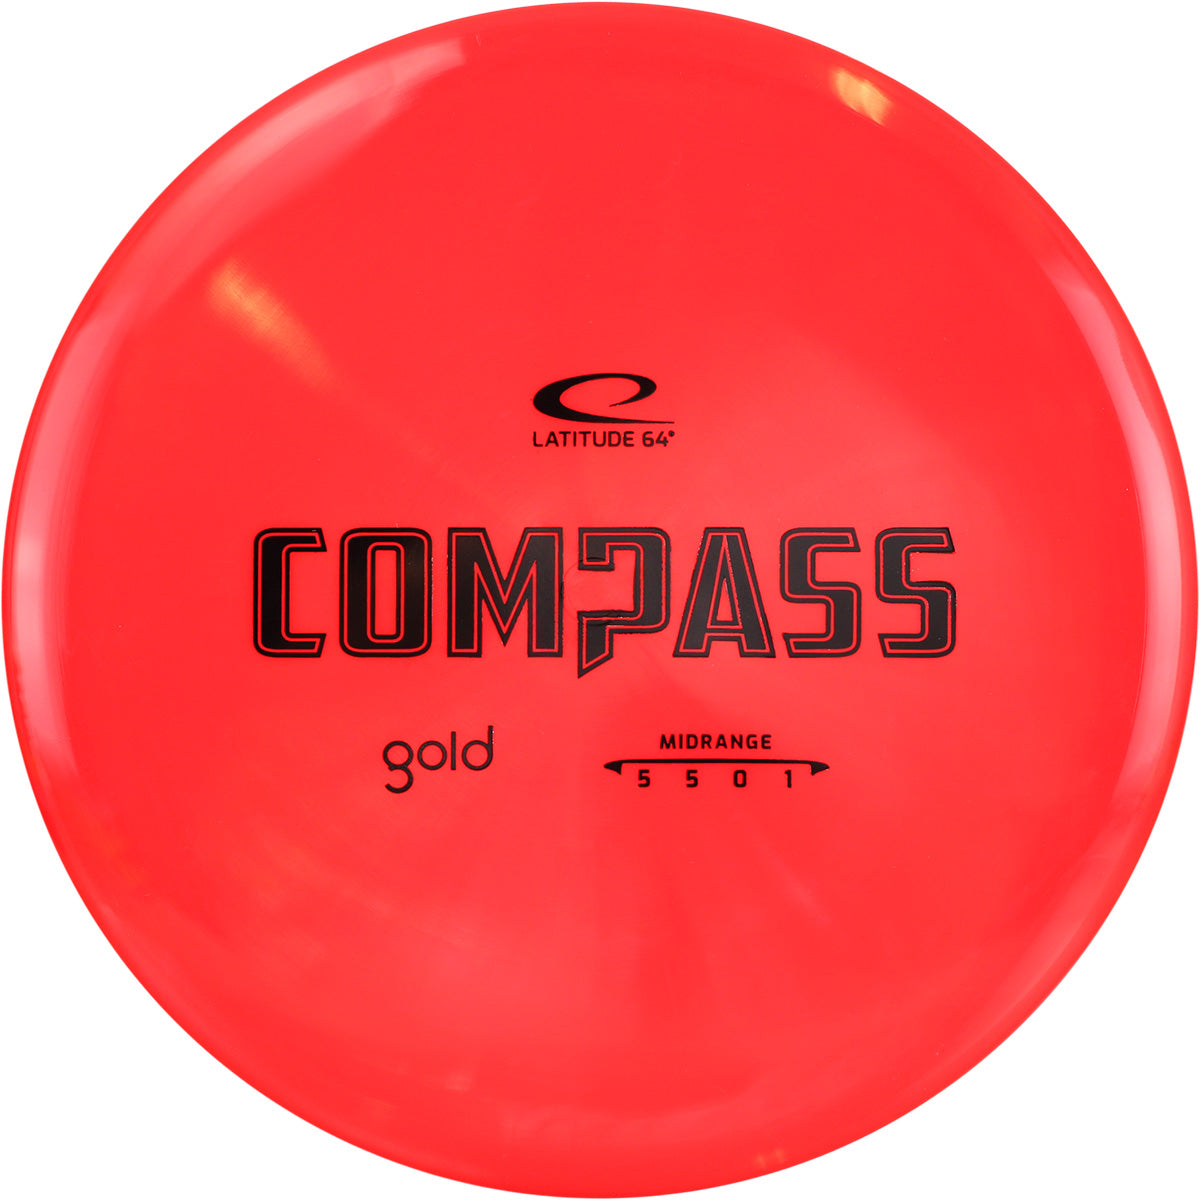 Gold Compass – Latitude 64° Factory Store